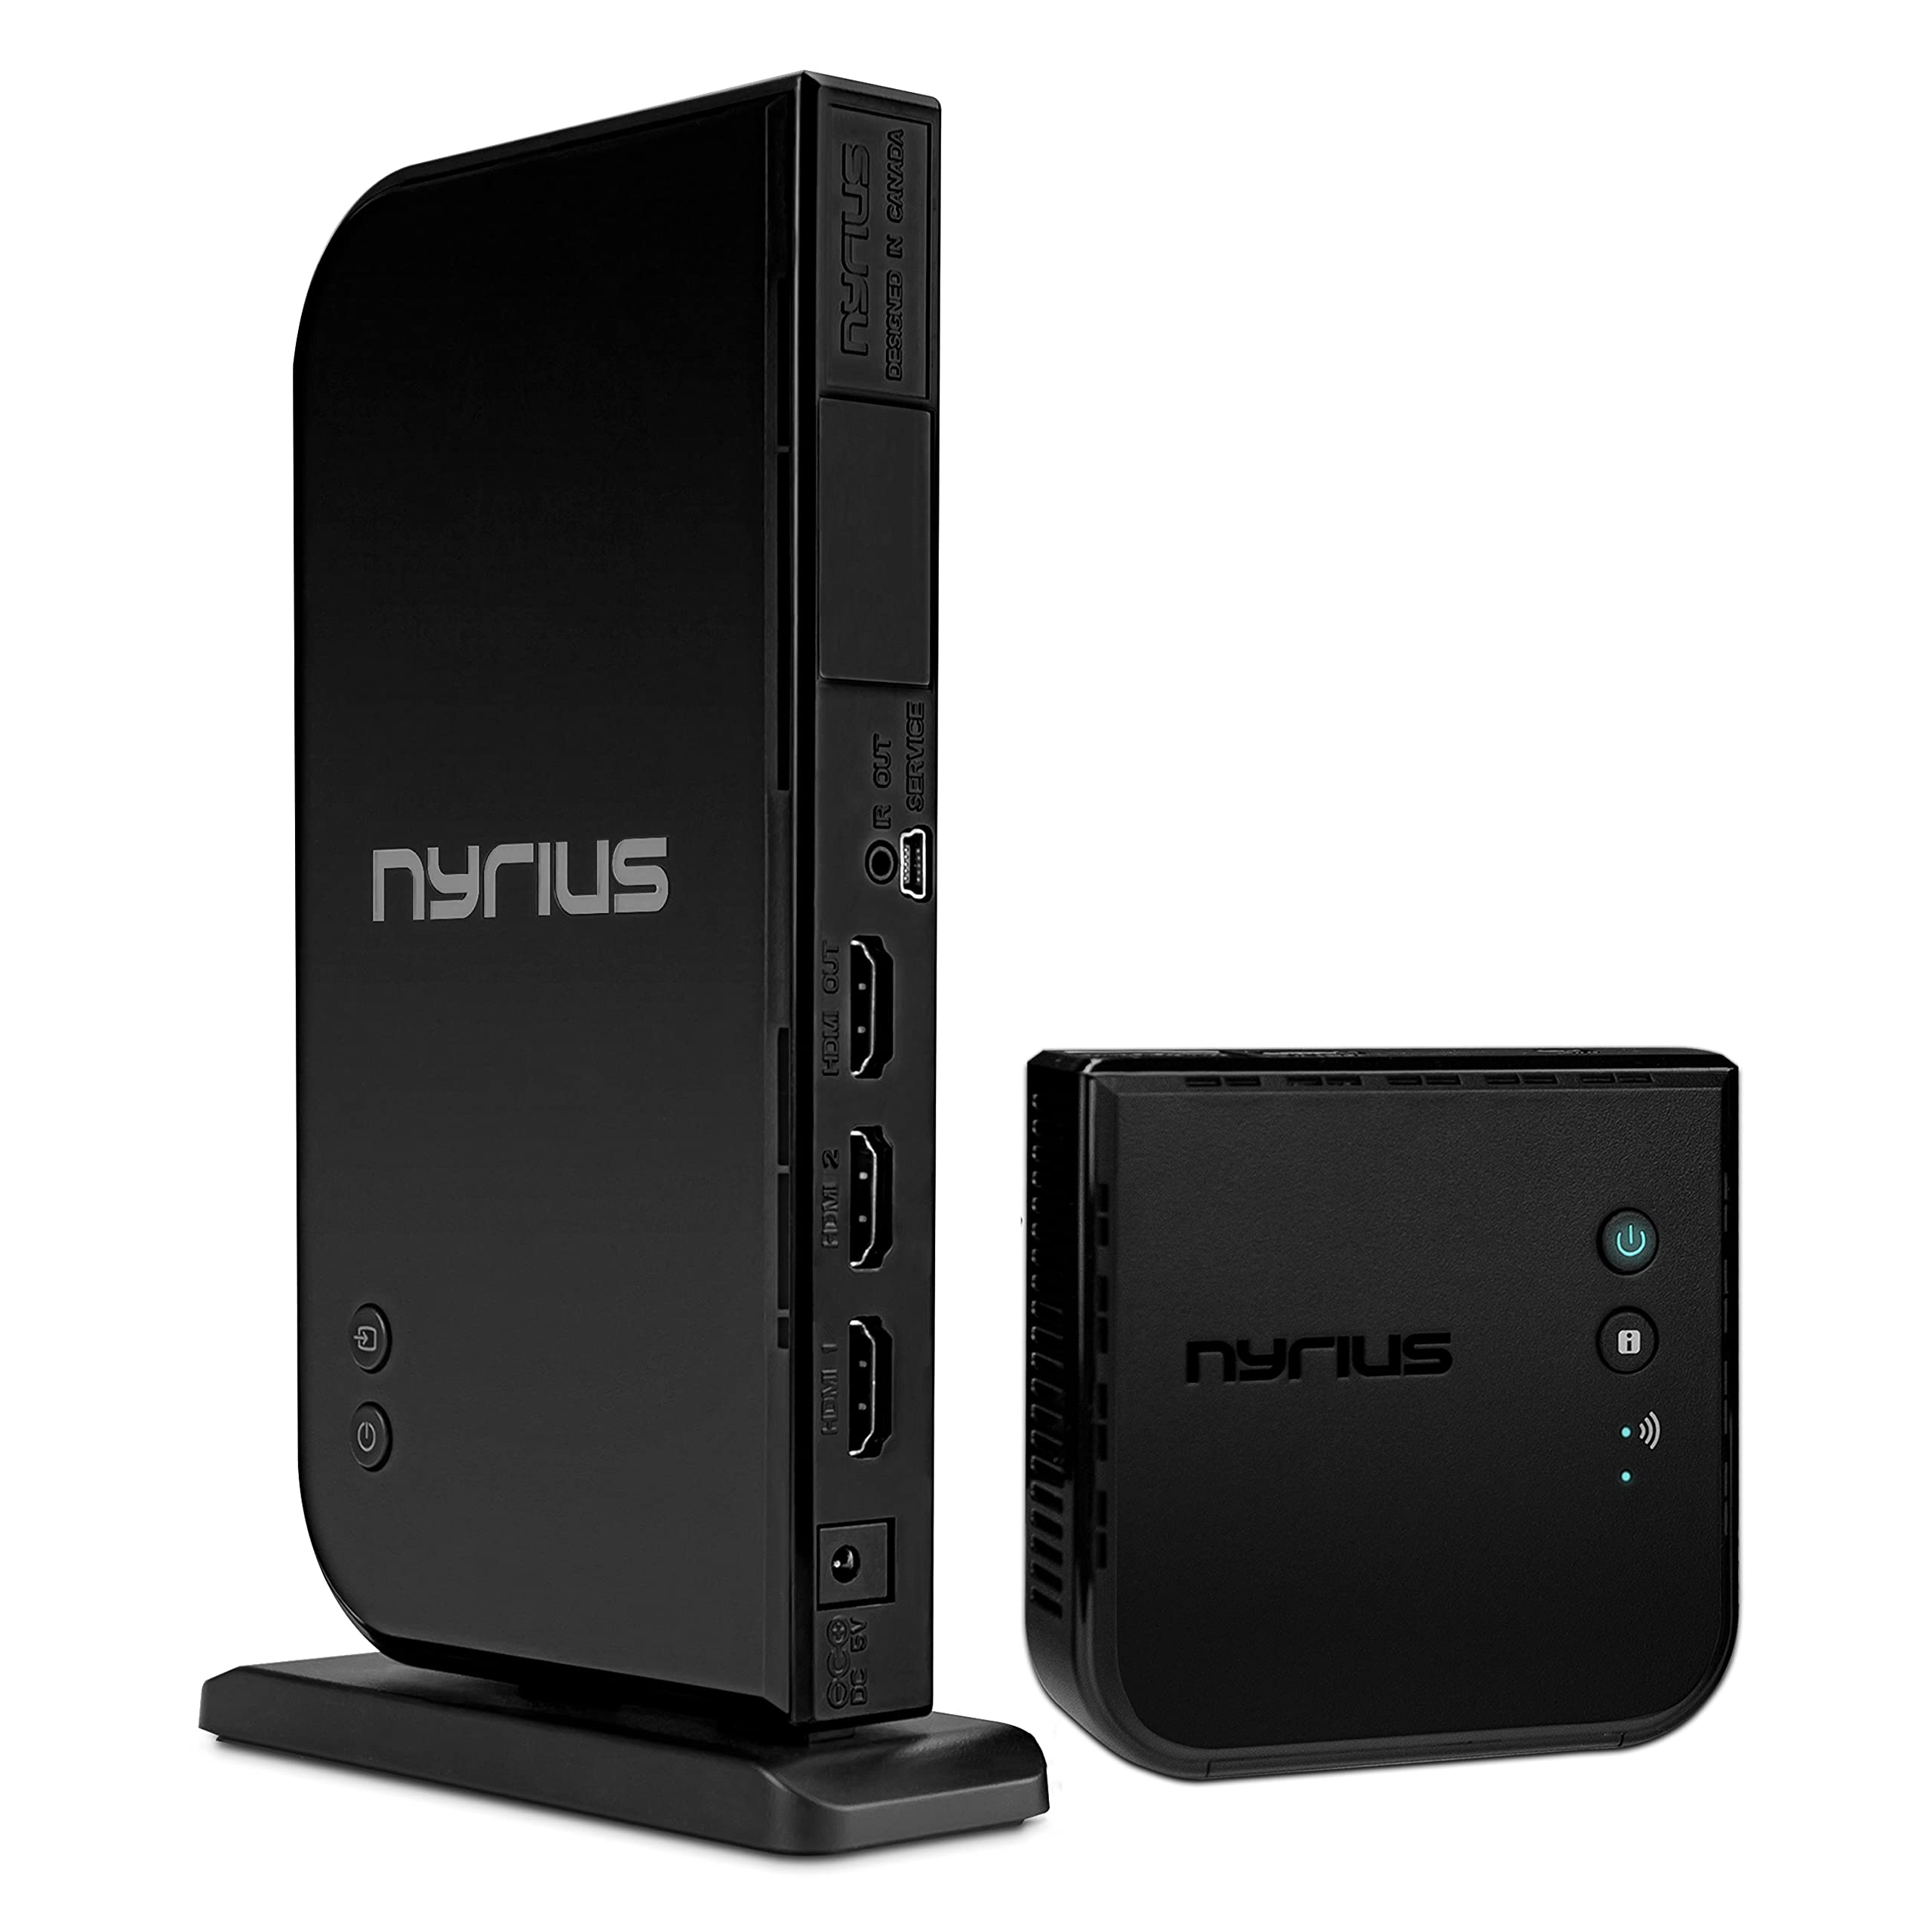 Nyrius Aries Home+ Wireless HDMI 2X Input Transmitter & Receiver for Streaming HD 1080p 3D Video and Digital Audio from Cable Box, Satellite, Bluray, DVD, PS4, PS3, Laptops, PC (NAVS502)